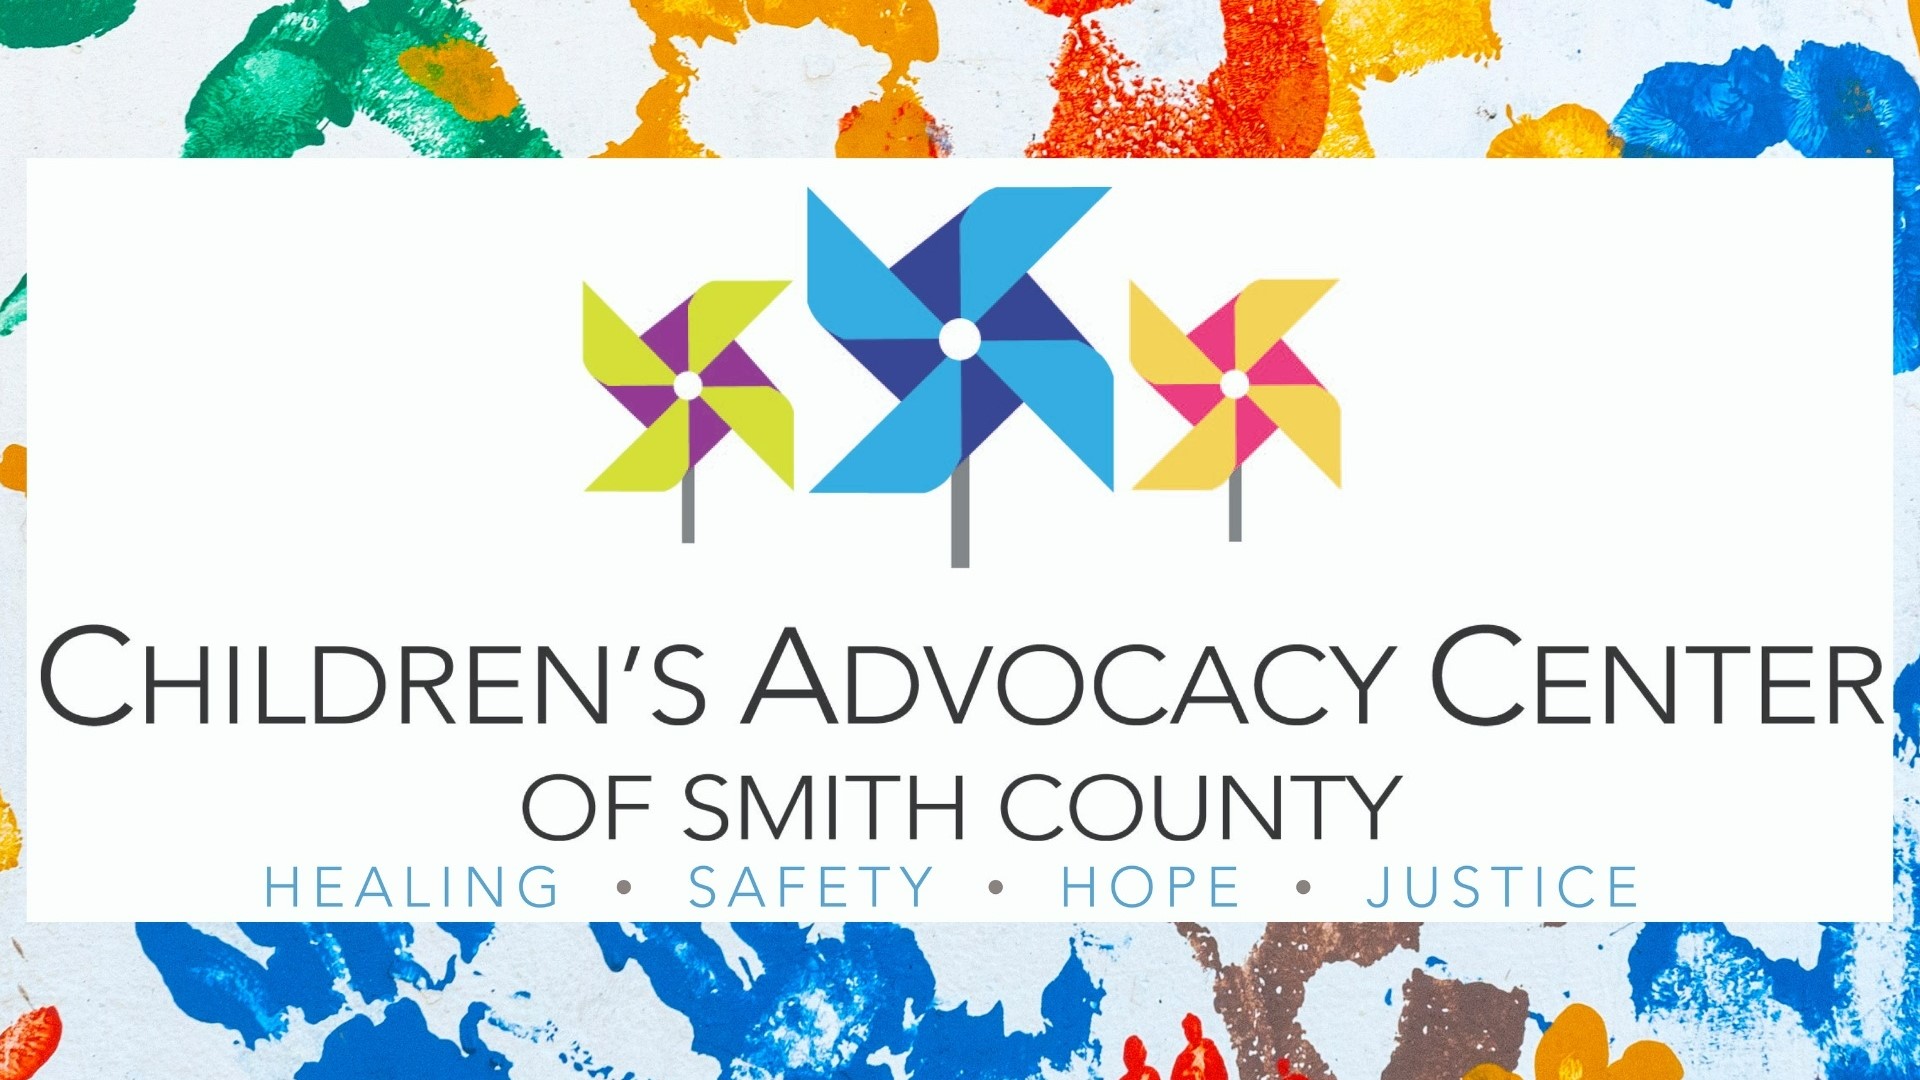 Children’s Advocacy Center of Smith County hosting events, fundraisers to bring awareness to child abuse